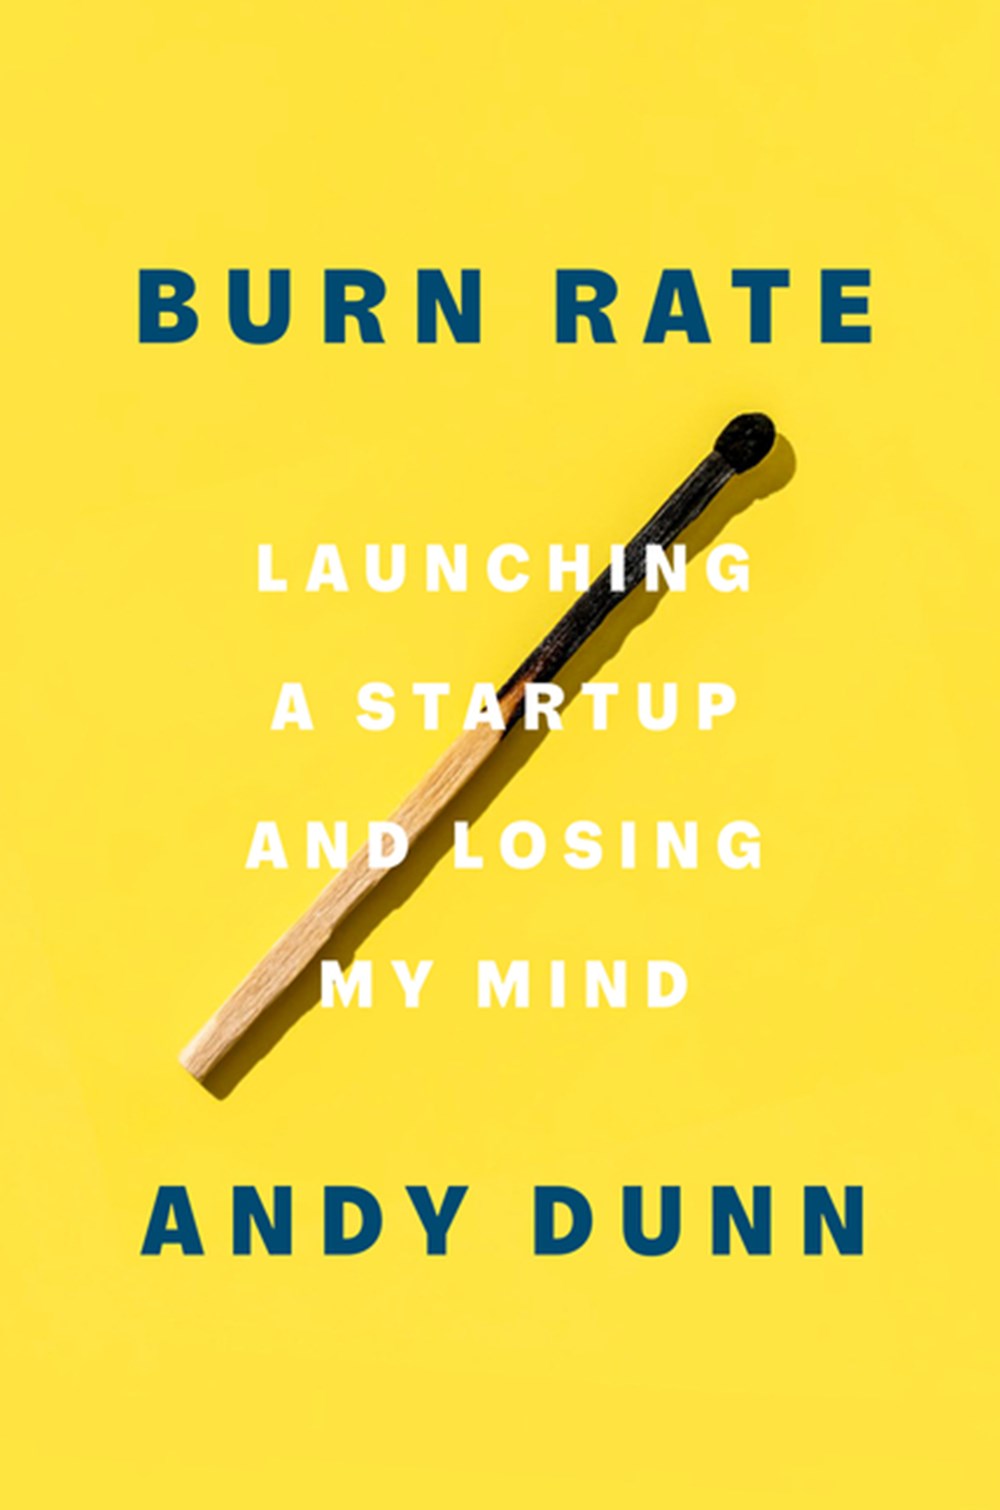 Burn Rate Launching a Startup and Losing My Mind